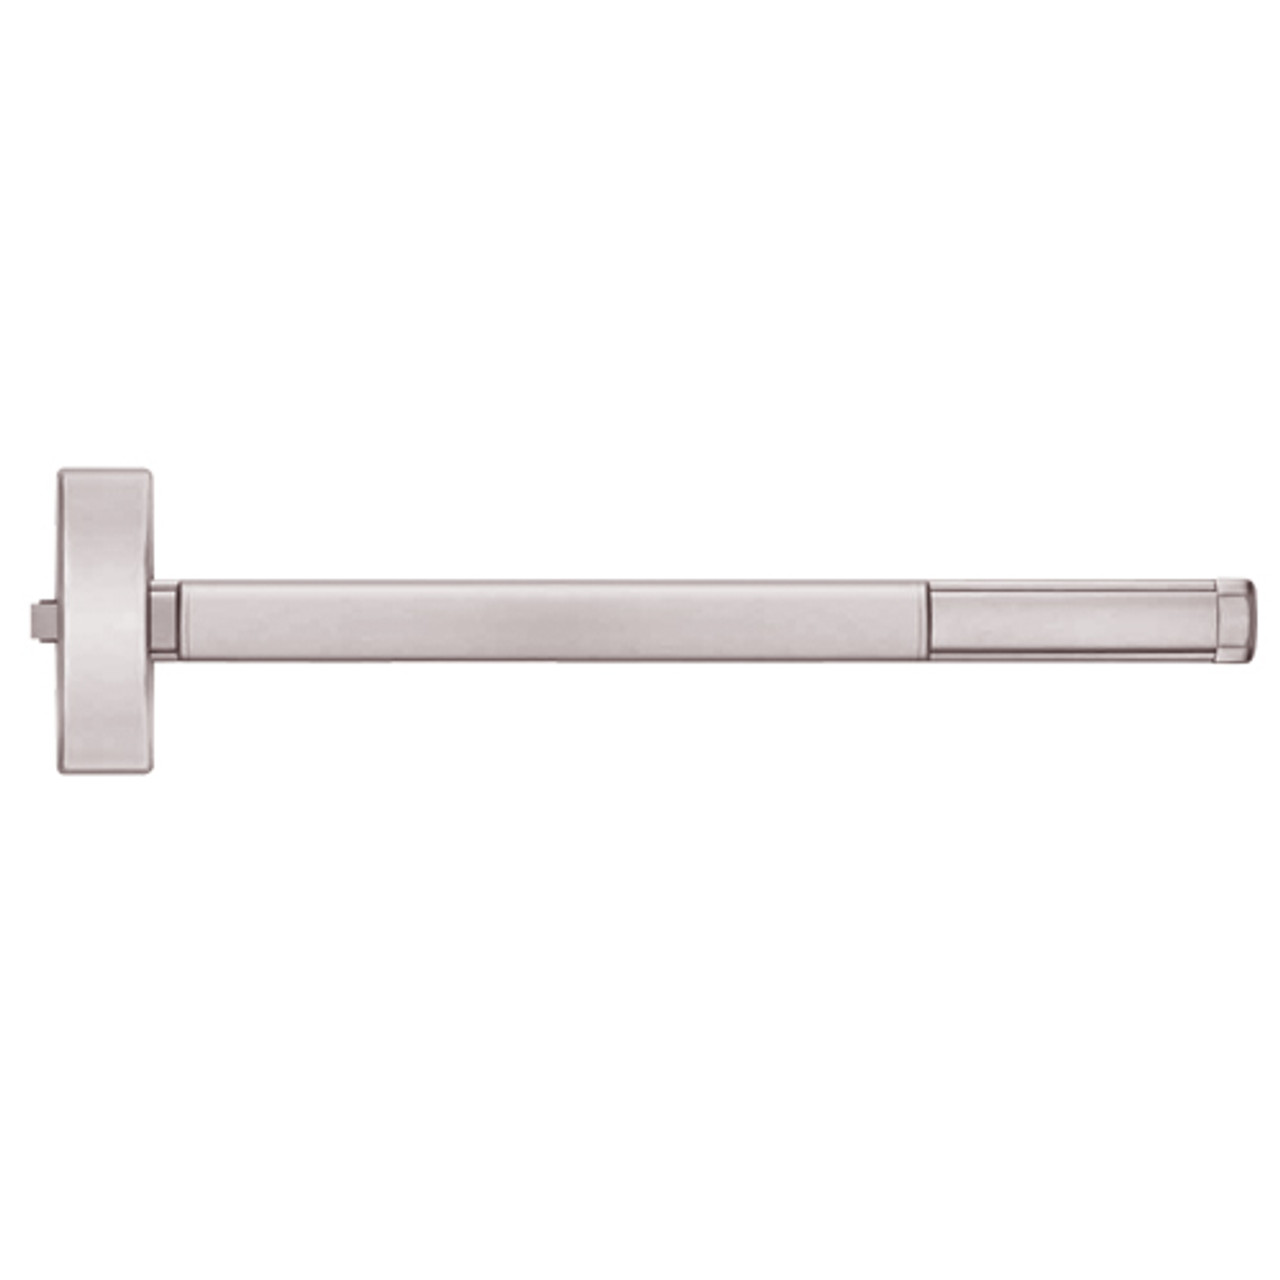 FL2108-628-48 PHI 2100 Series Fire Rated Apex Rim Exit Device Prepped for Key Controls Lever/Knob in Satin Aluminum Finish